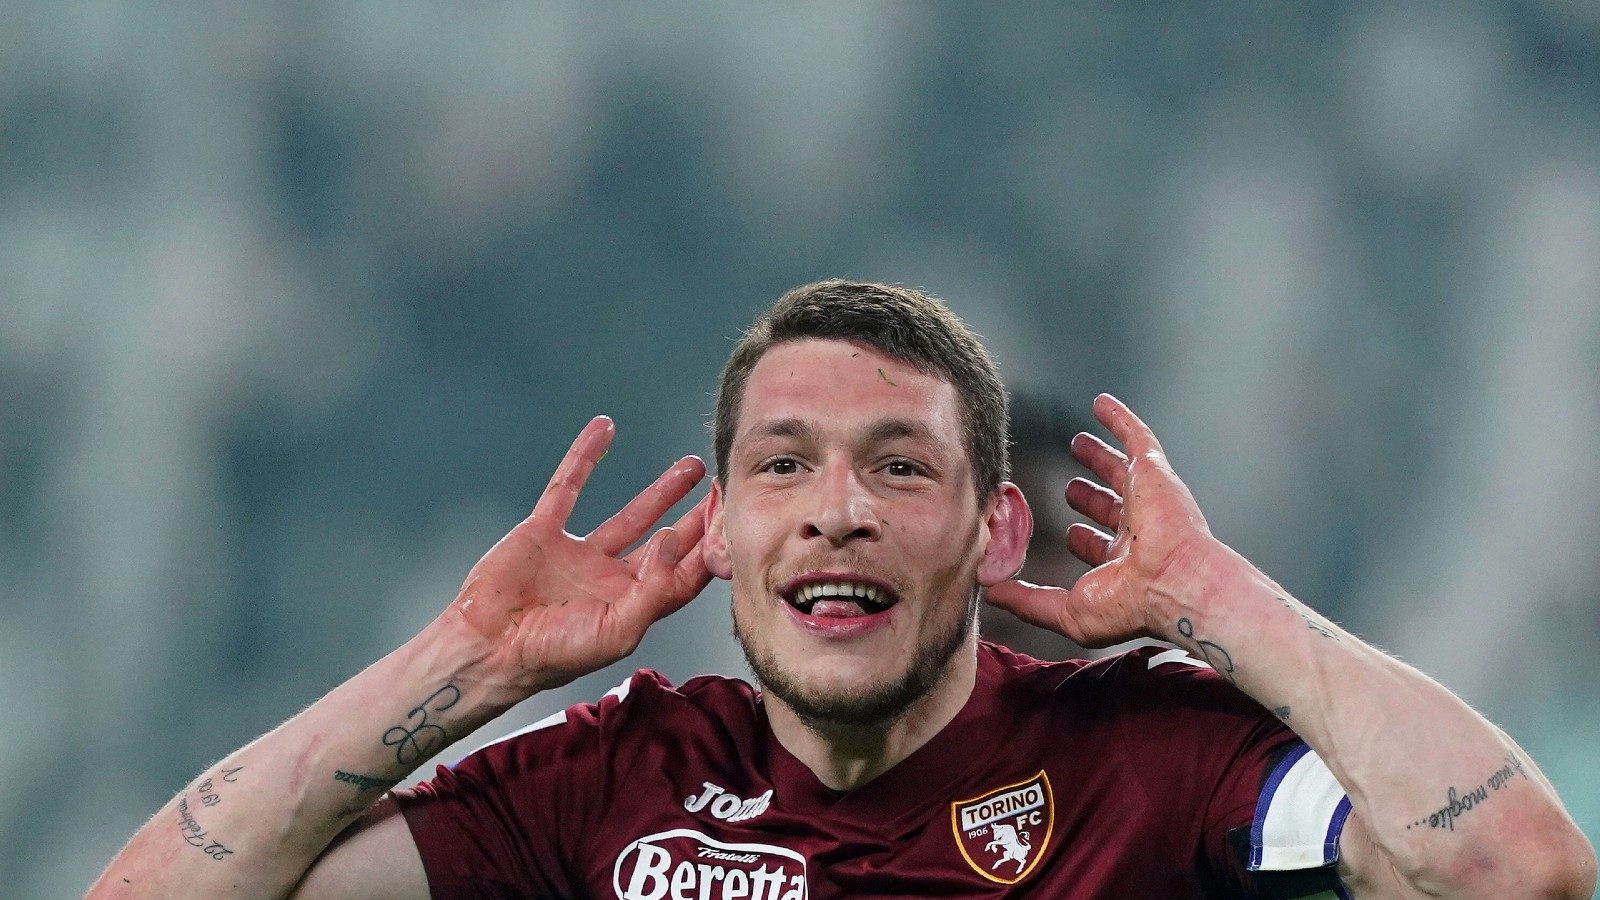 Andrea Belotti returns in style to earn derby point for Torino at Juventus  as former champions lose more ground - Eurosport